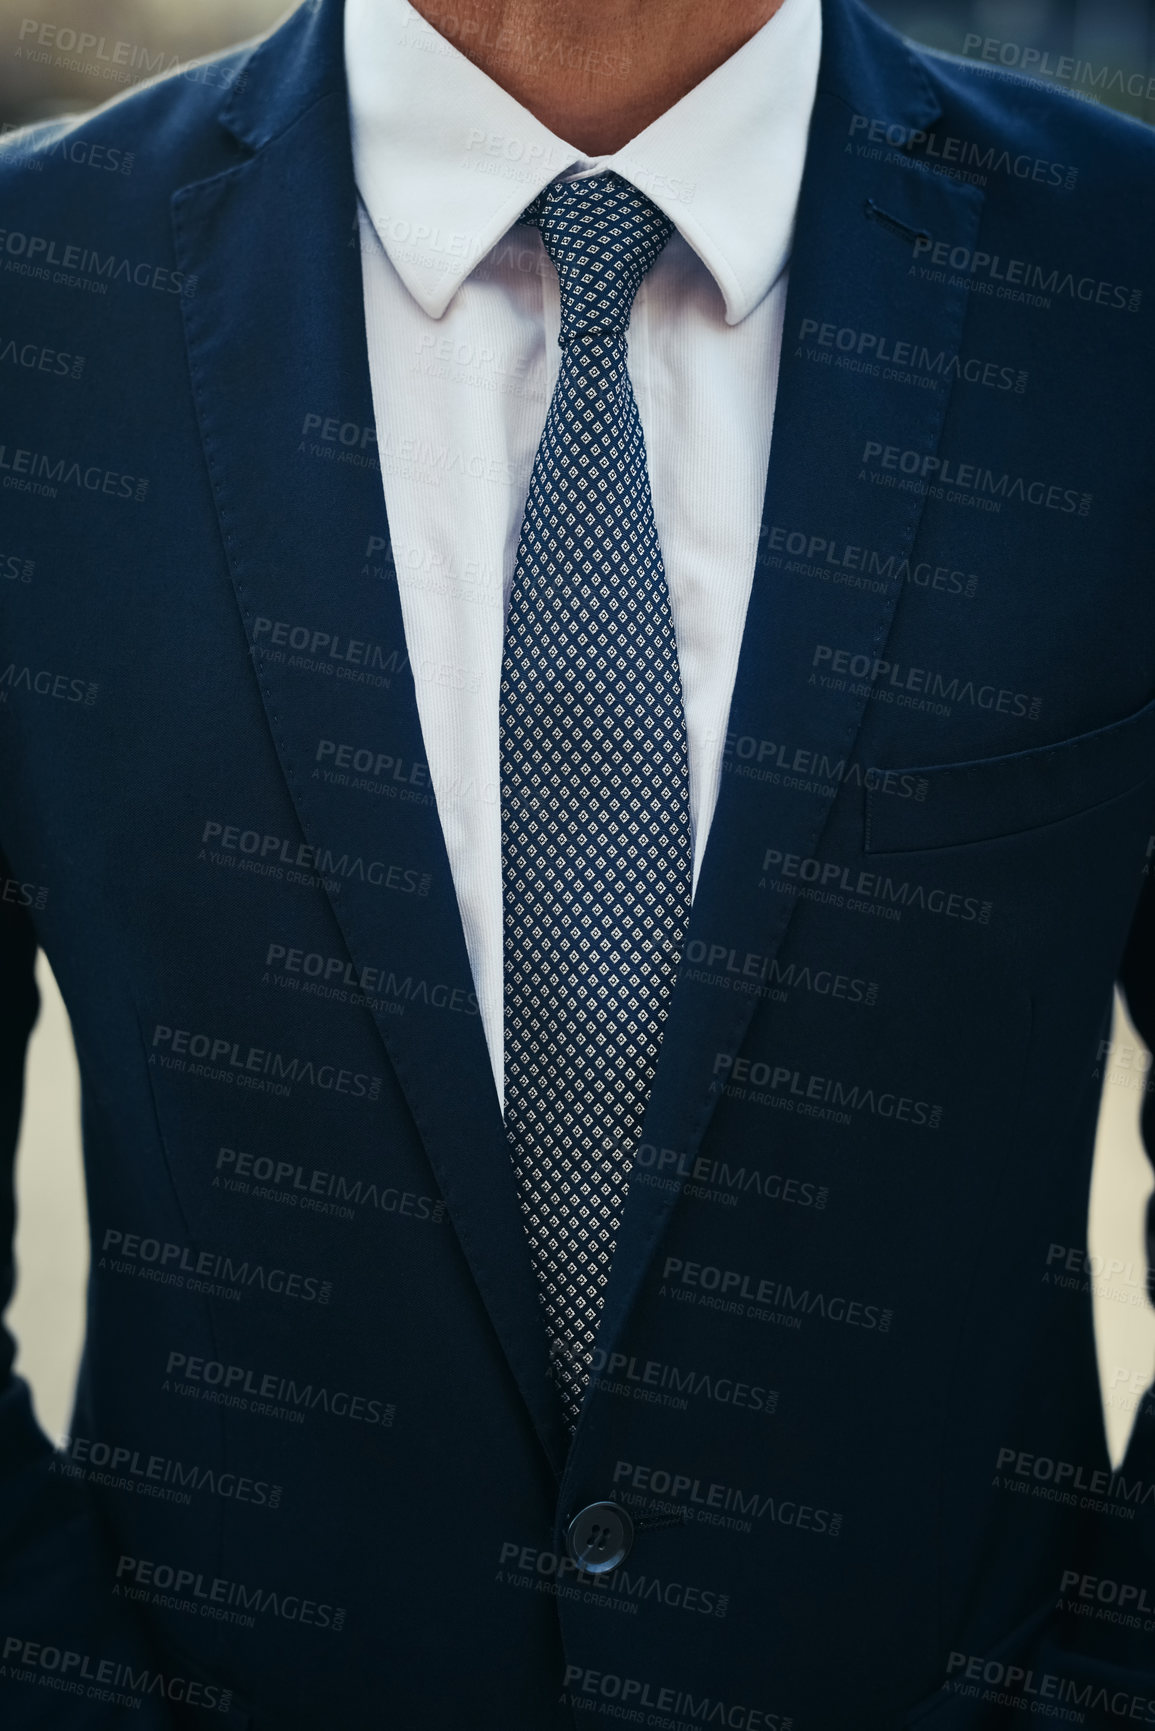 Buy stock photo Shot of an unidentifiable businessman wearing a smart suit